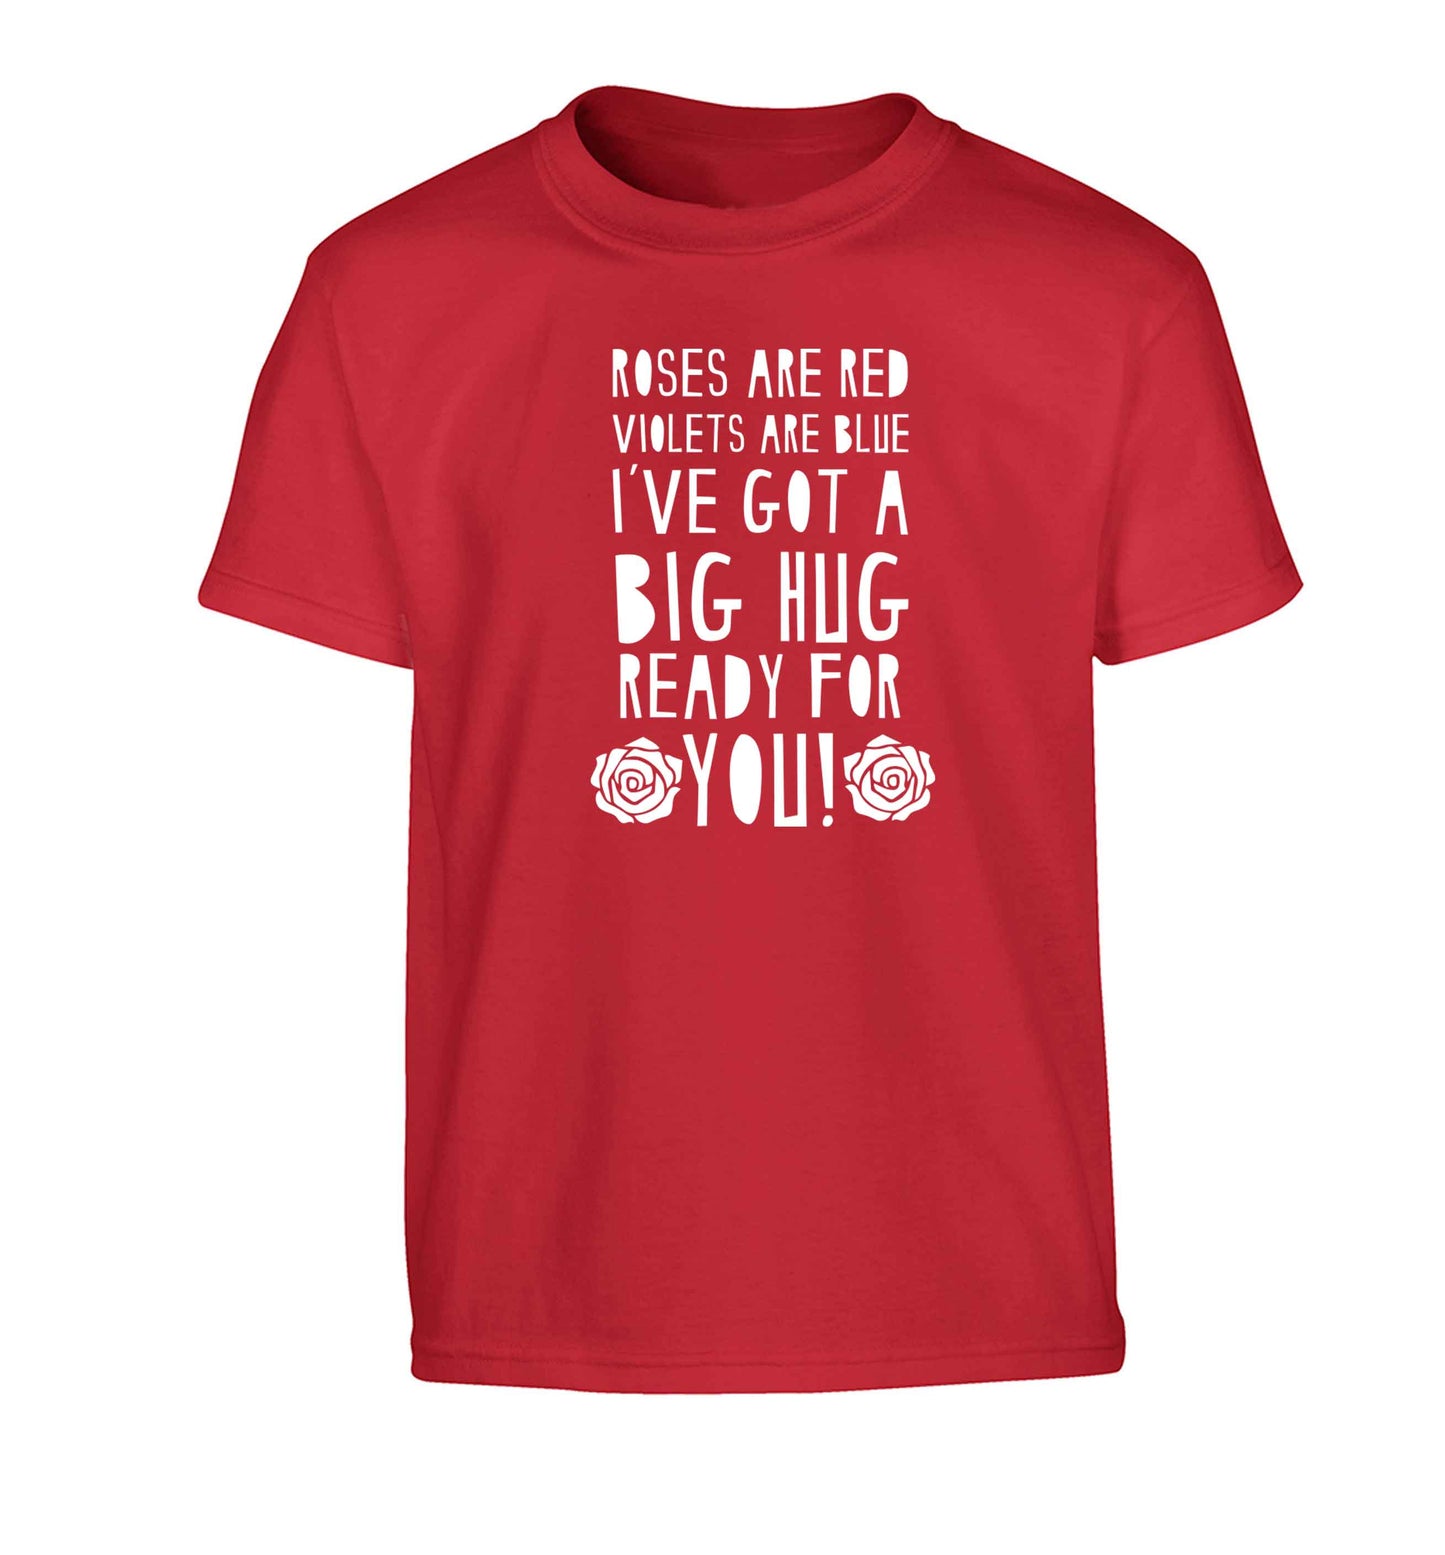 Roses are red violets are blue I've got a big hug coming for you Children's red Tshirt 12-13 Years